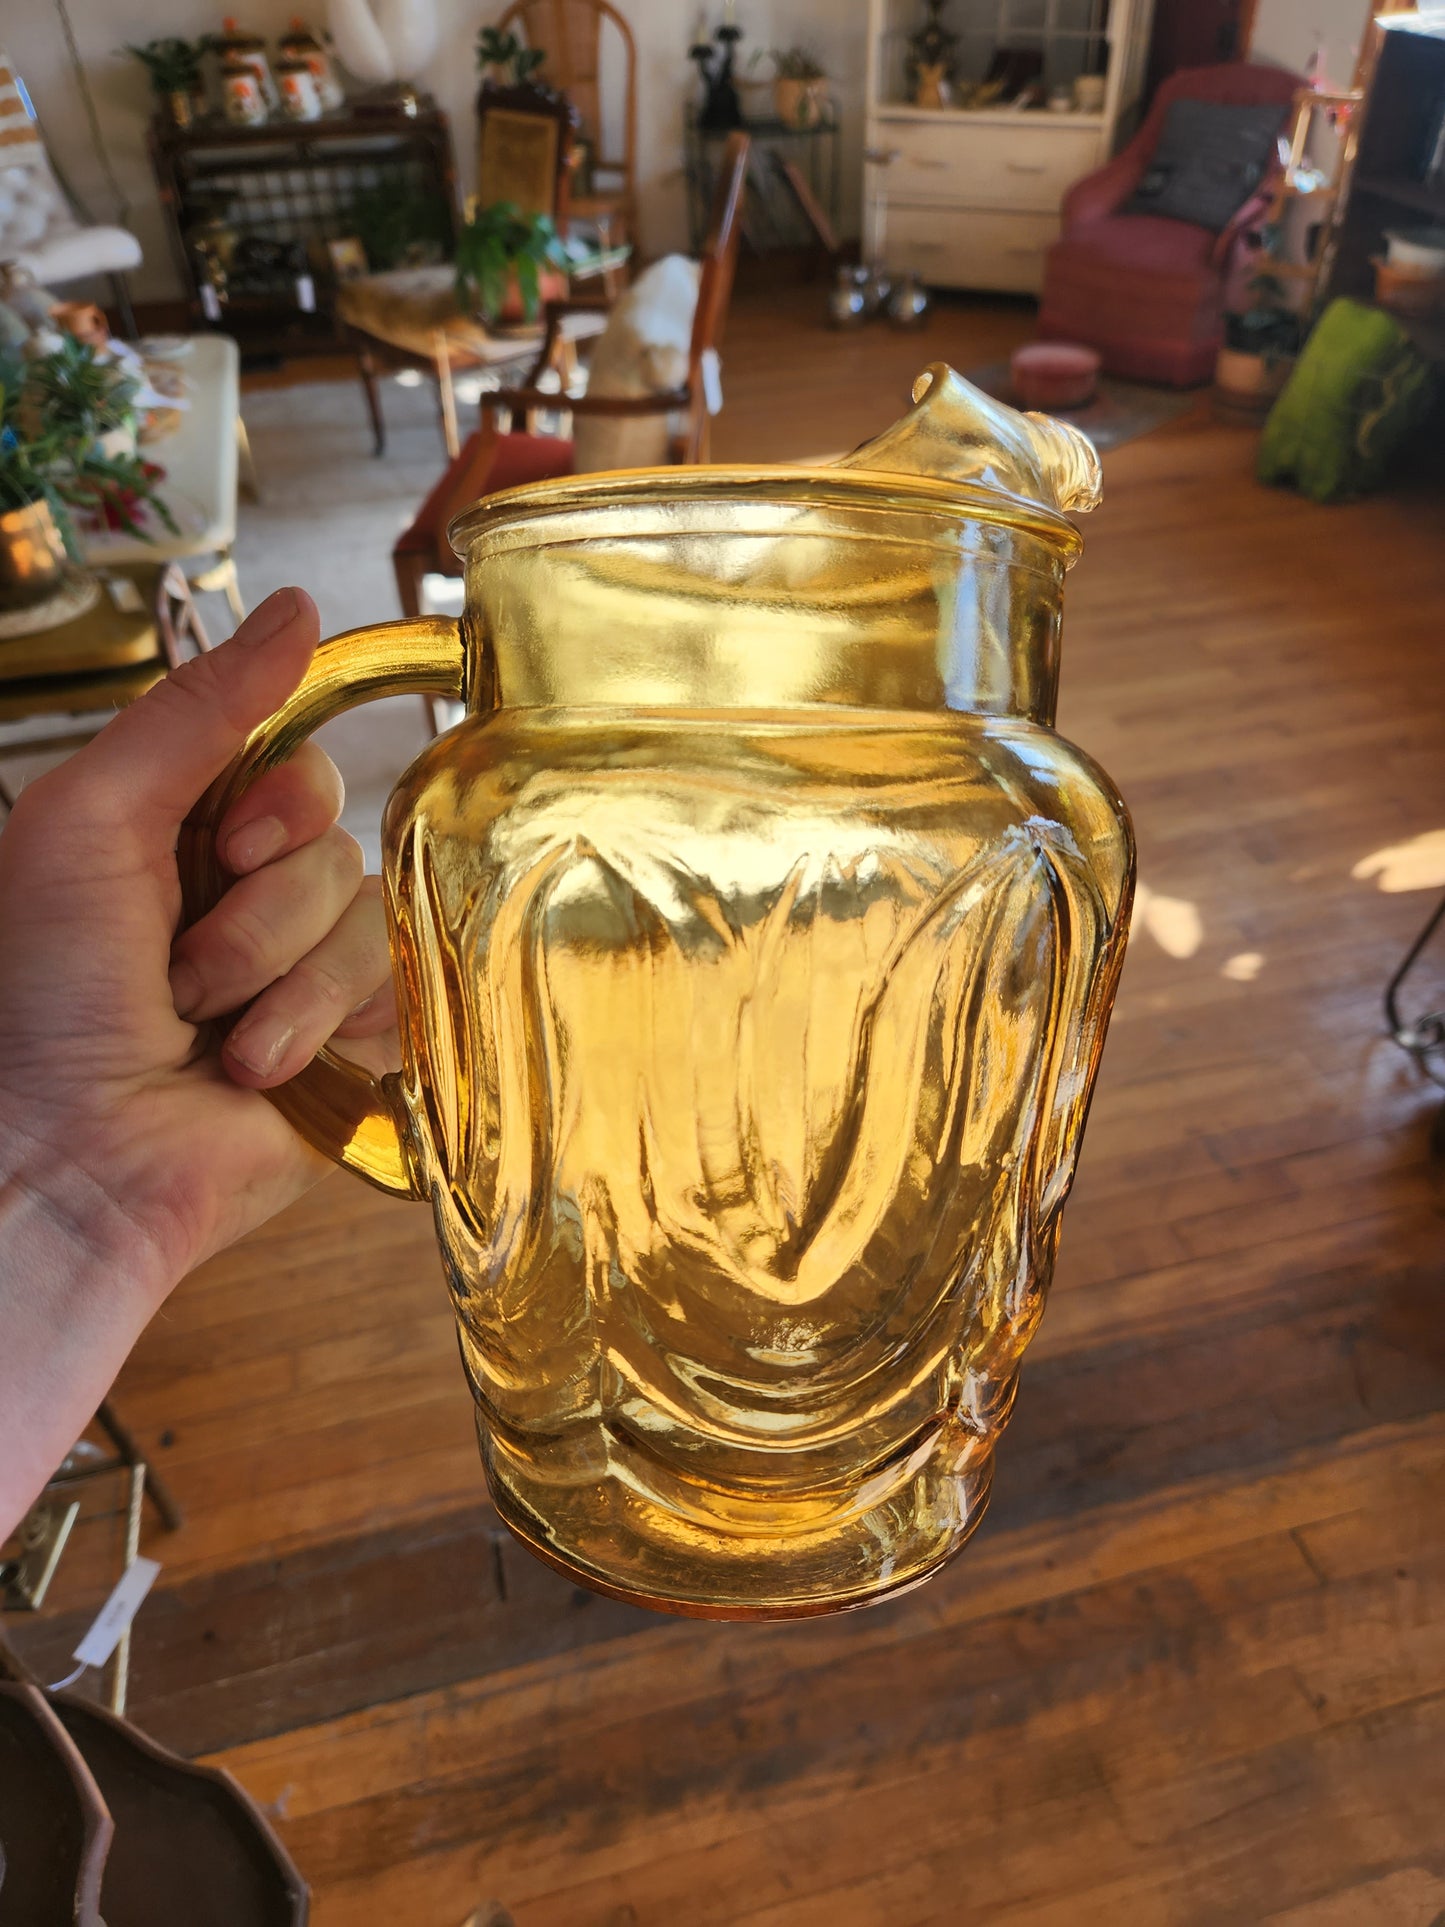 Amber Glass Pitcher and Drinking Glasses